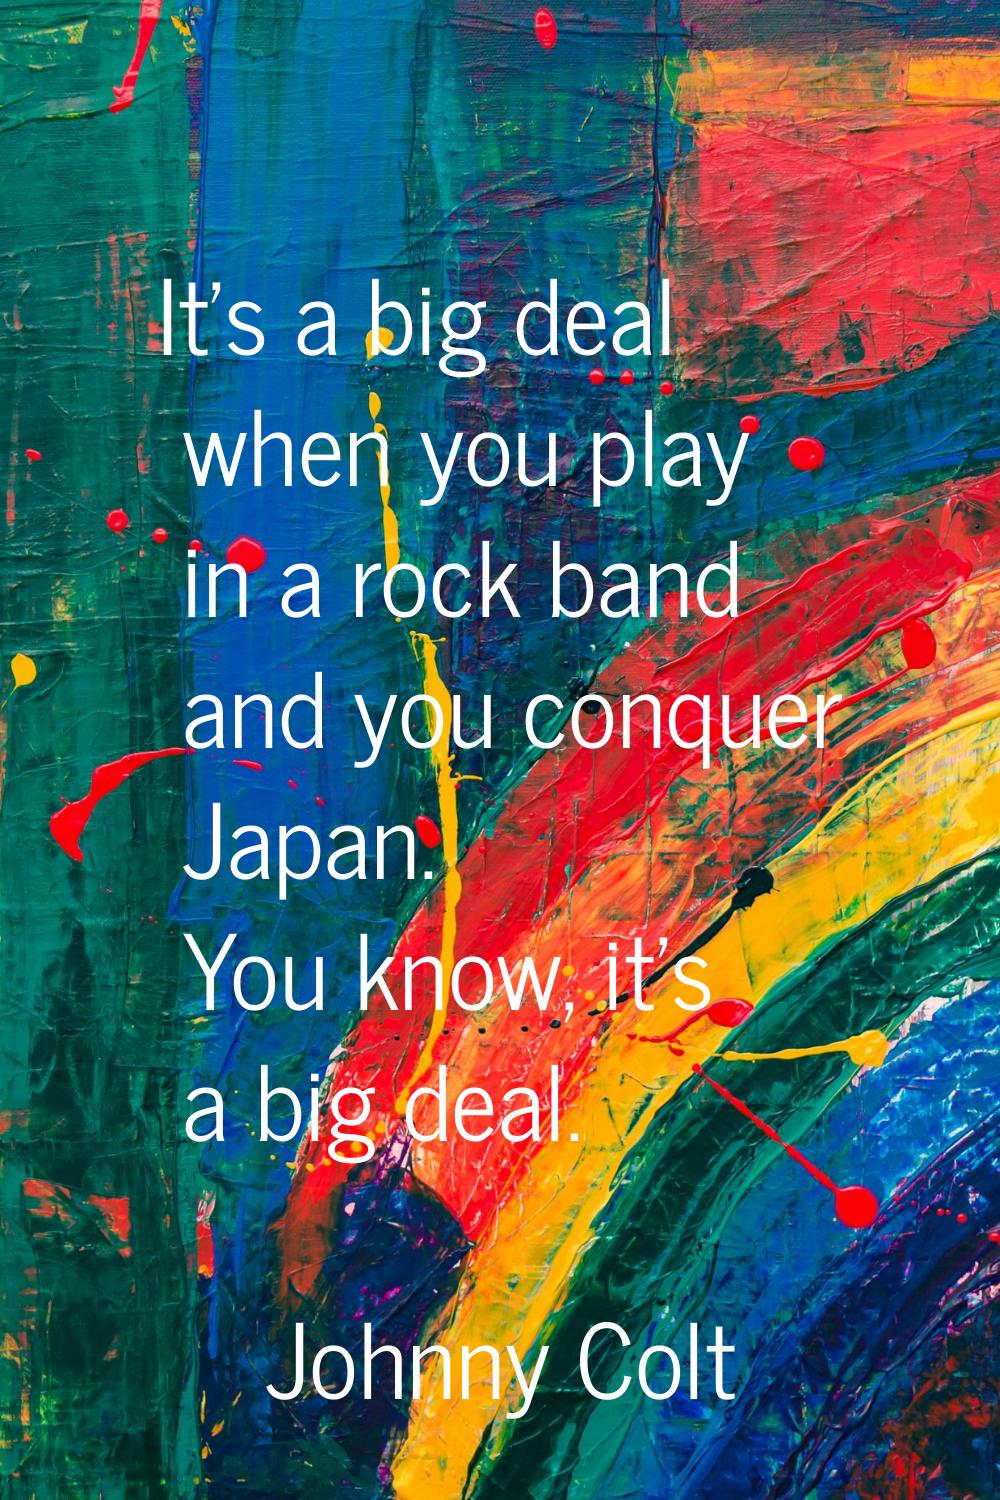 It's a big deal when you play in a rock band and you conquer Japan. You know, it's a big deal.